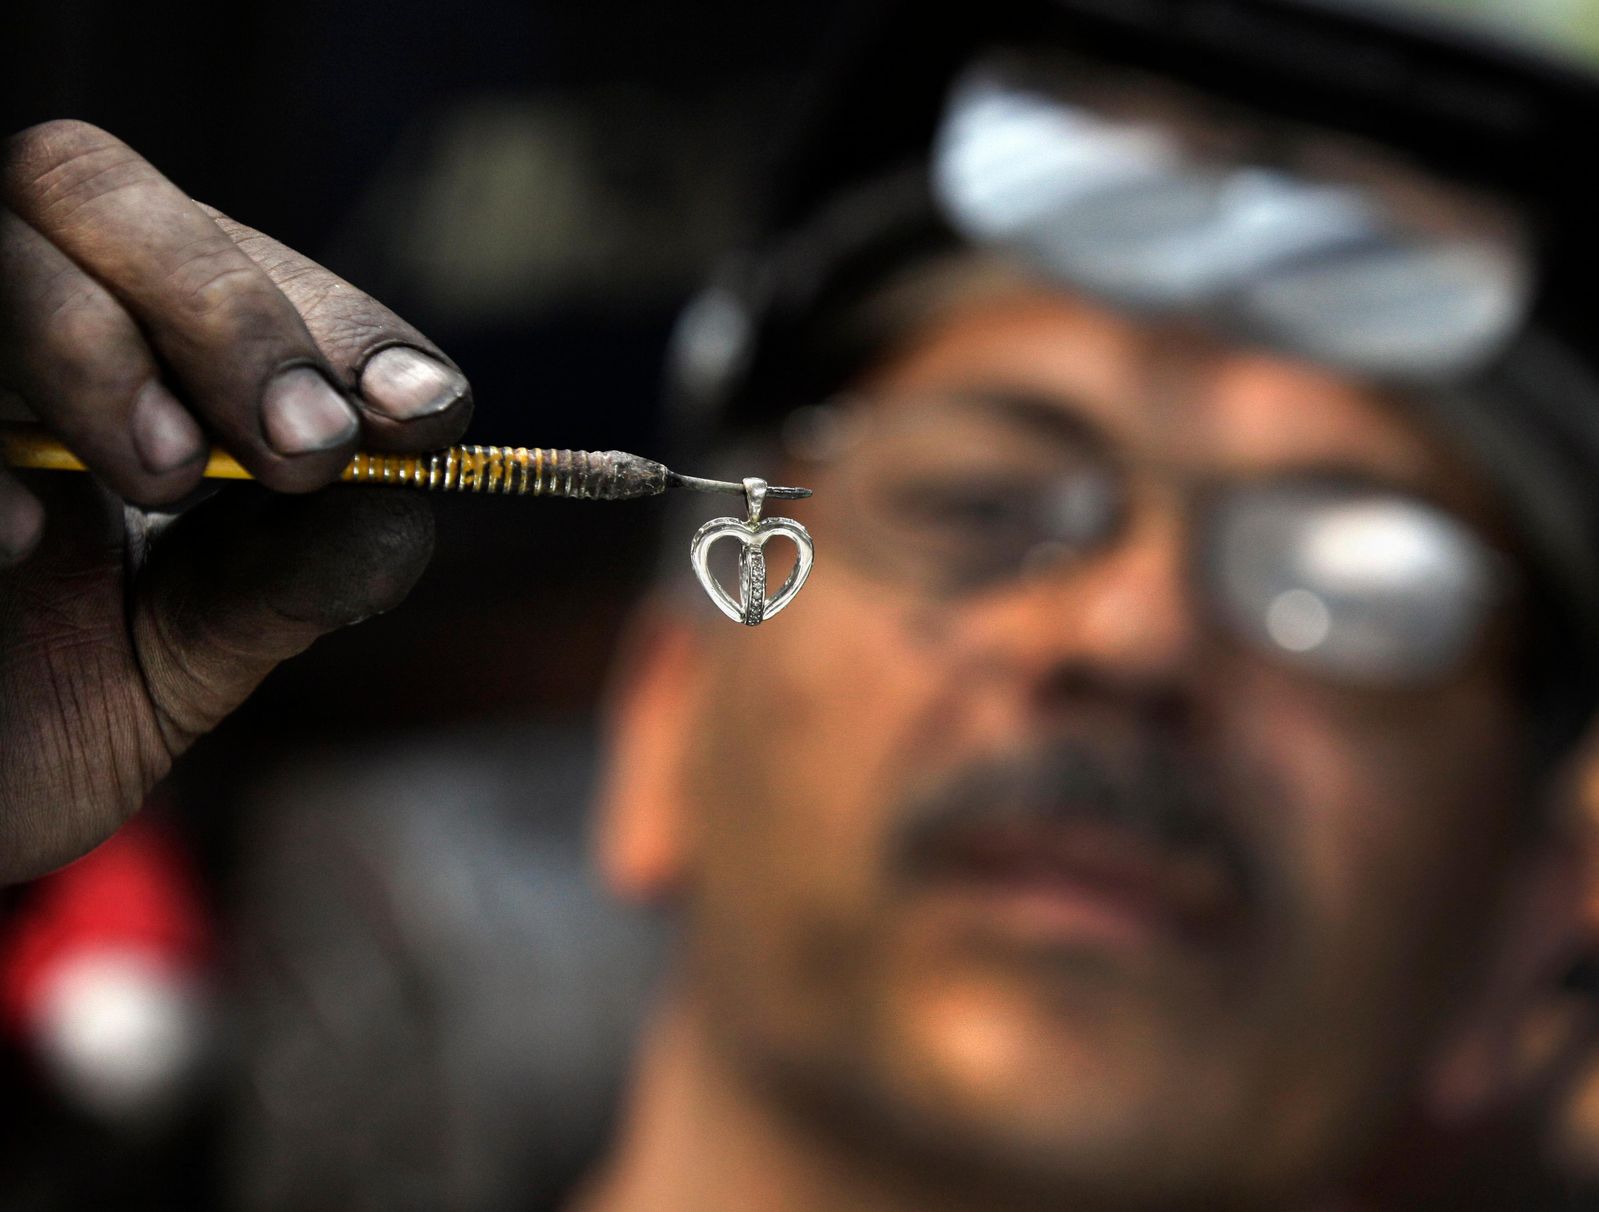 Turning Diamonds Into a Commodity to Be Traded - The New York Times